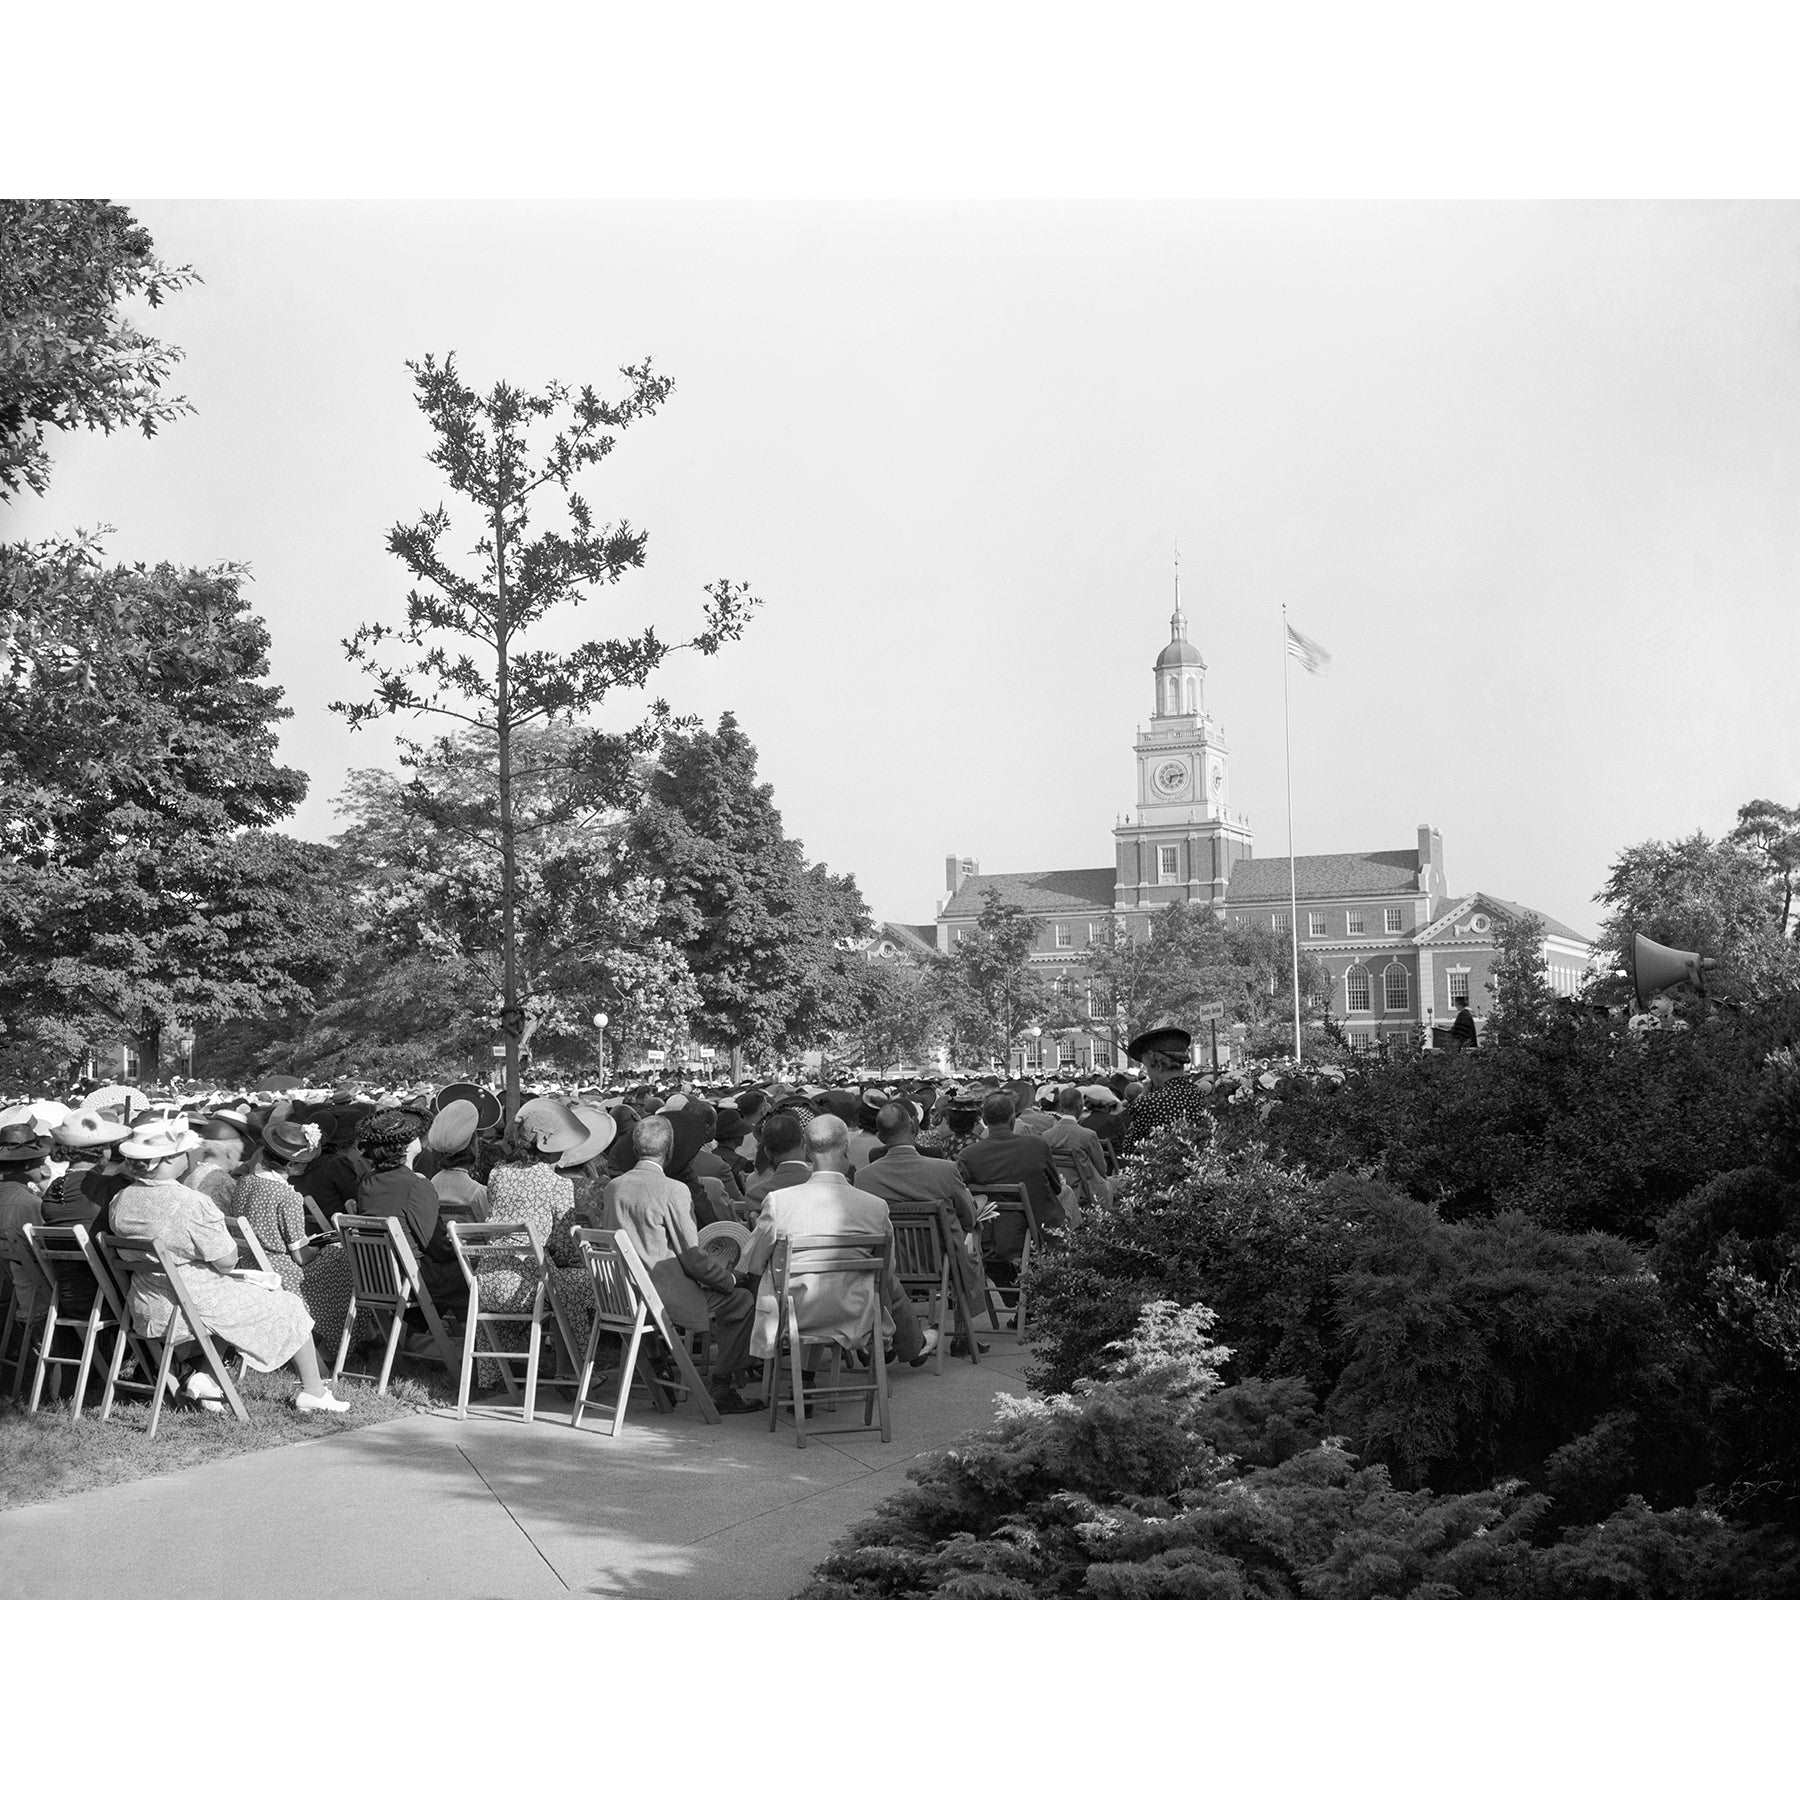 A vintage photograph depicting a seated crowd at a commencement ceremony at Howard University